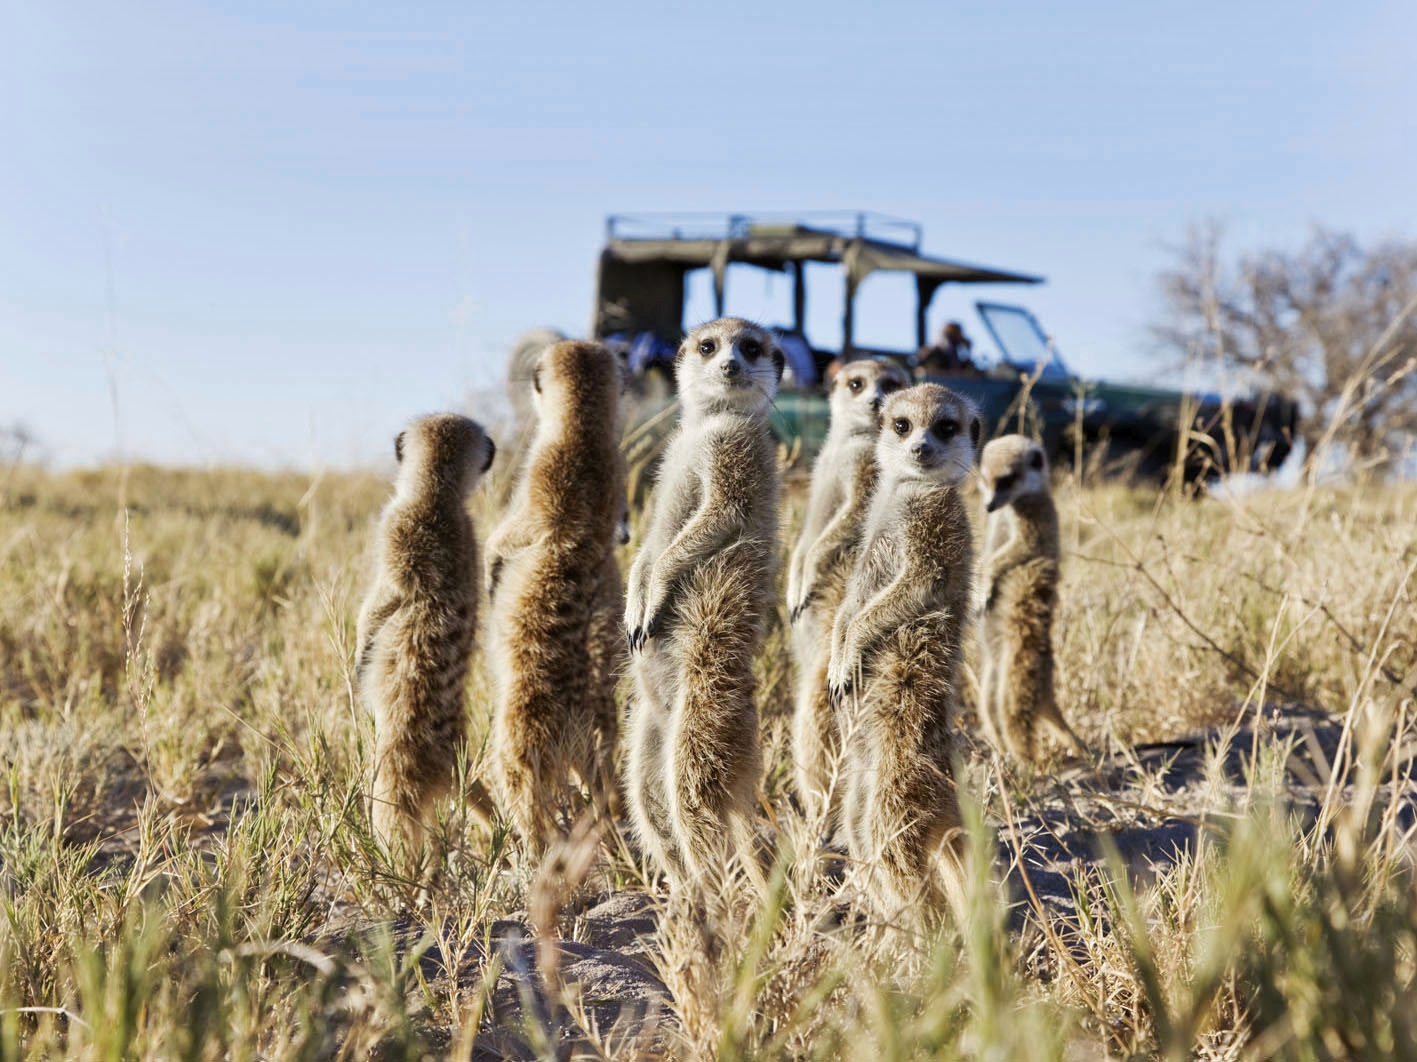 Meerkats looking around with a safari vehicle in the background